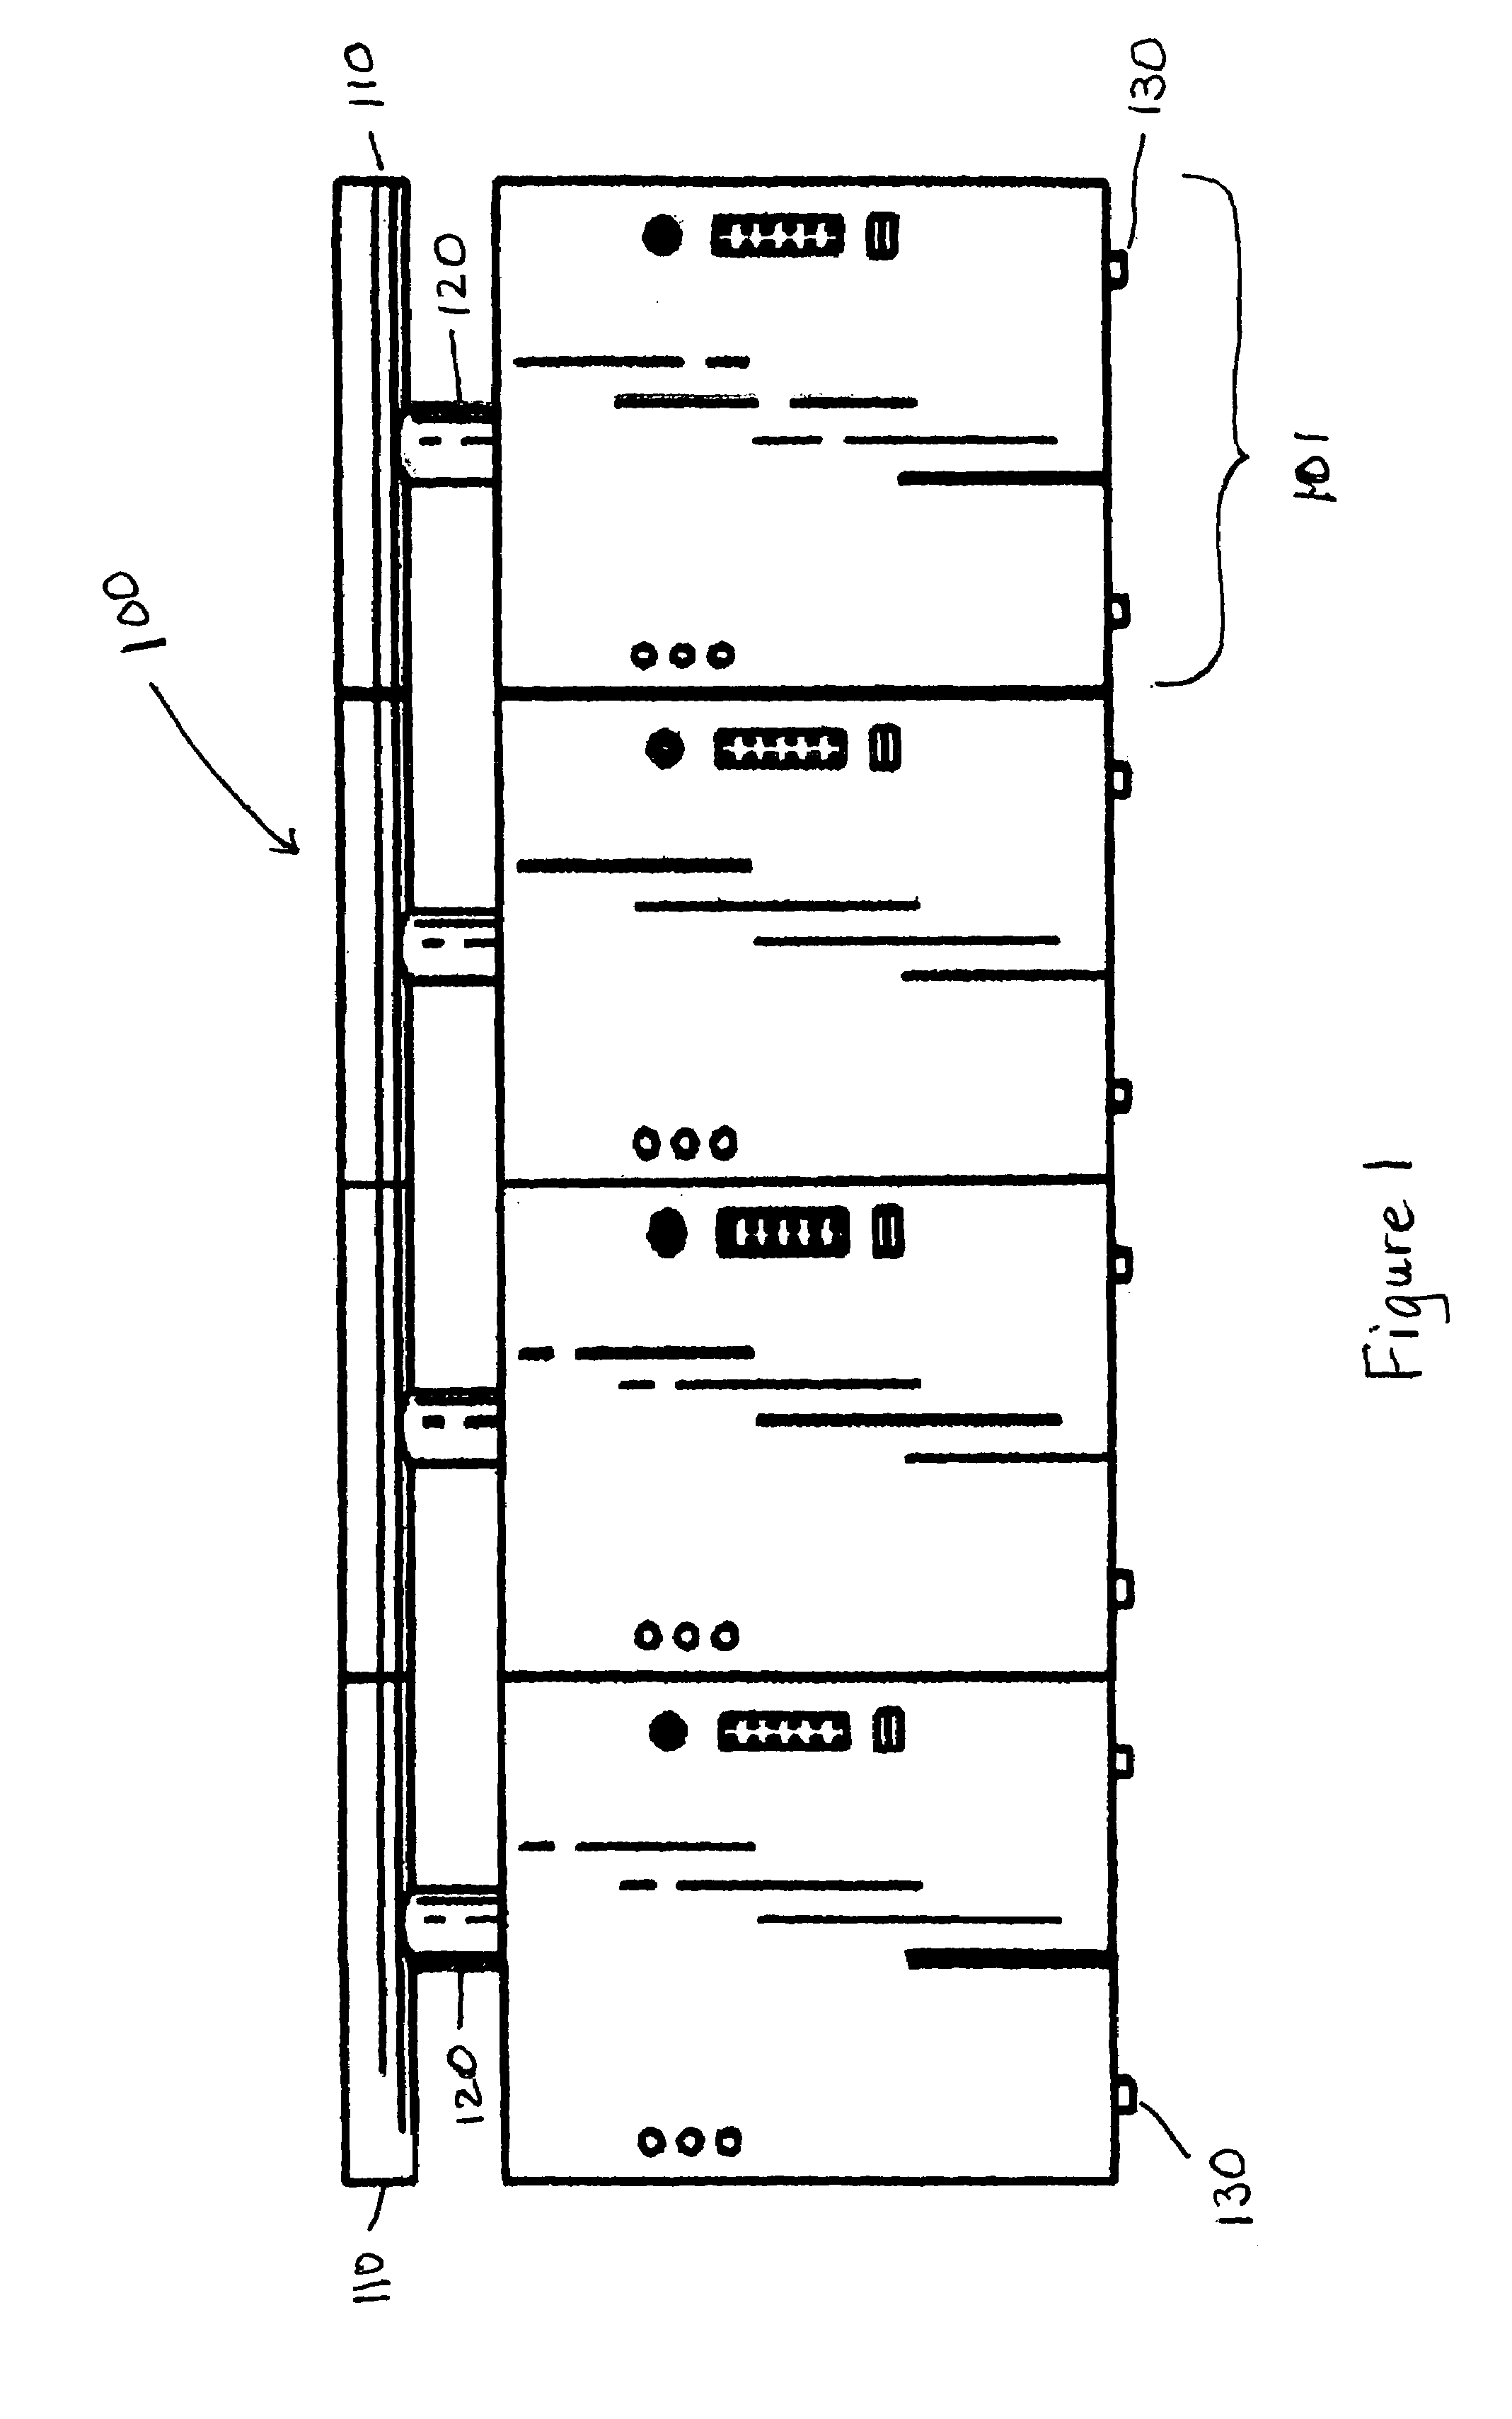 Method for curing high internal phase emulsions